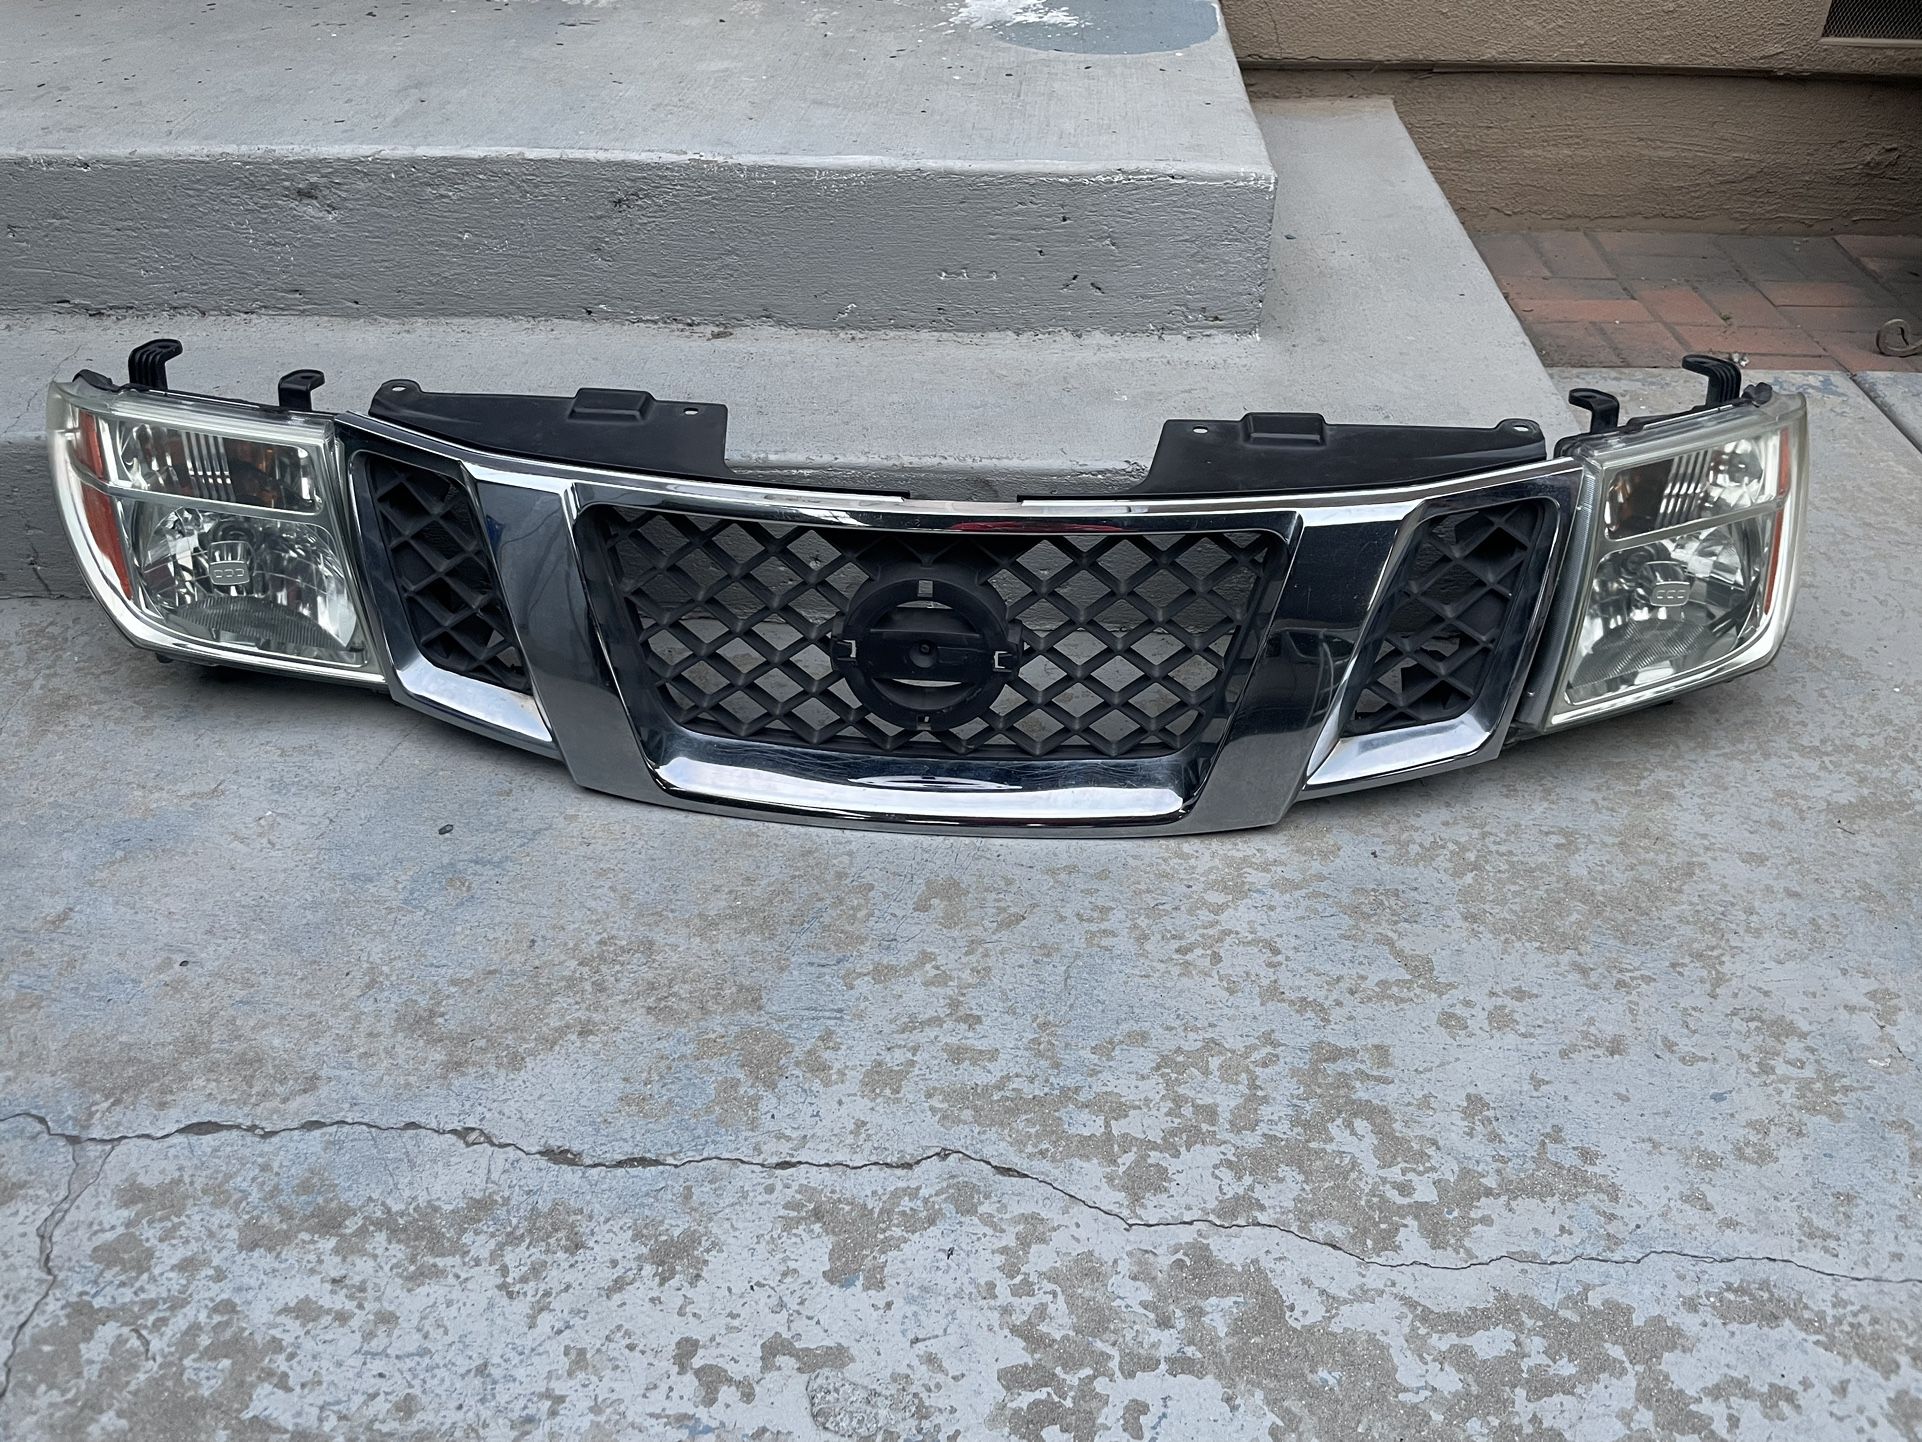 Nissan Frontier Headlights  And Grill OEM  2005 2006 2007 2008 Patfinder 2005- 2012